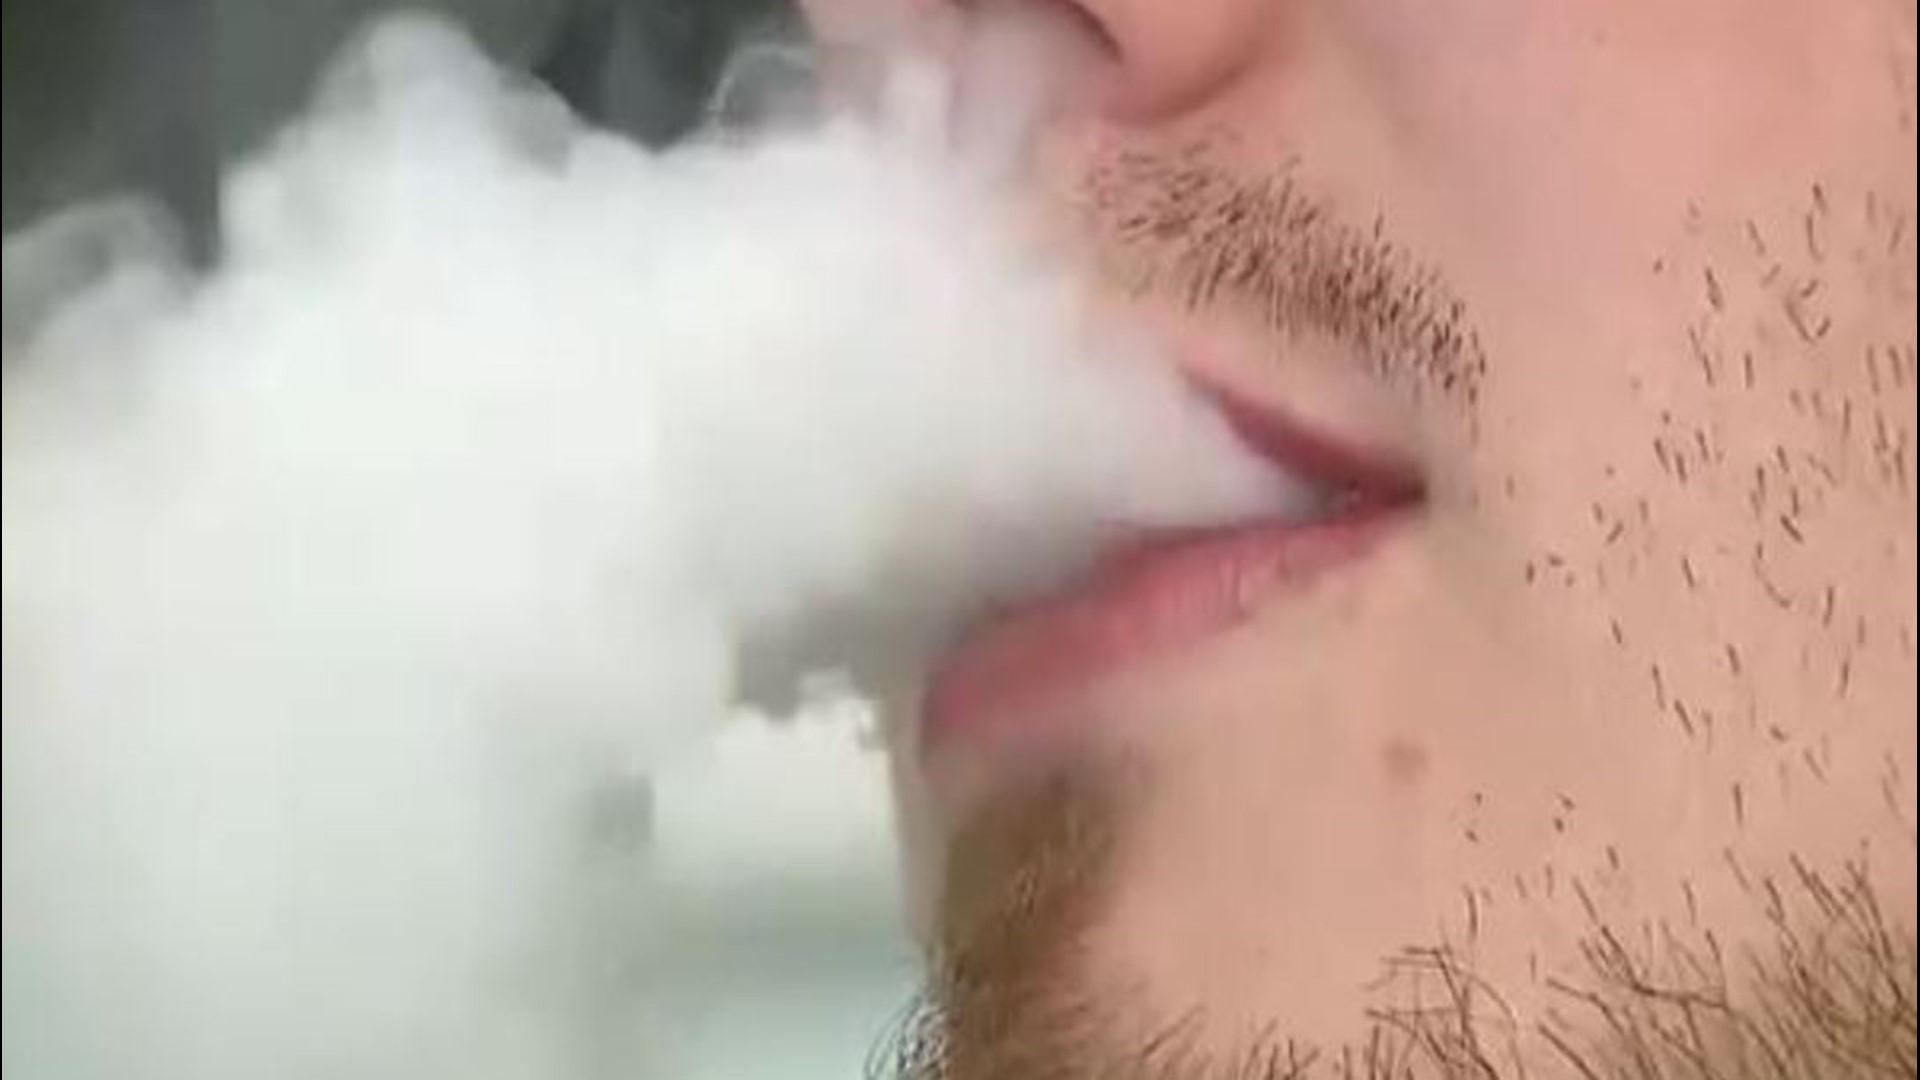 Government records shows that across the Triad, FDA inspectors caught stores selling vapes to minors 199 times over three years.